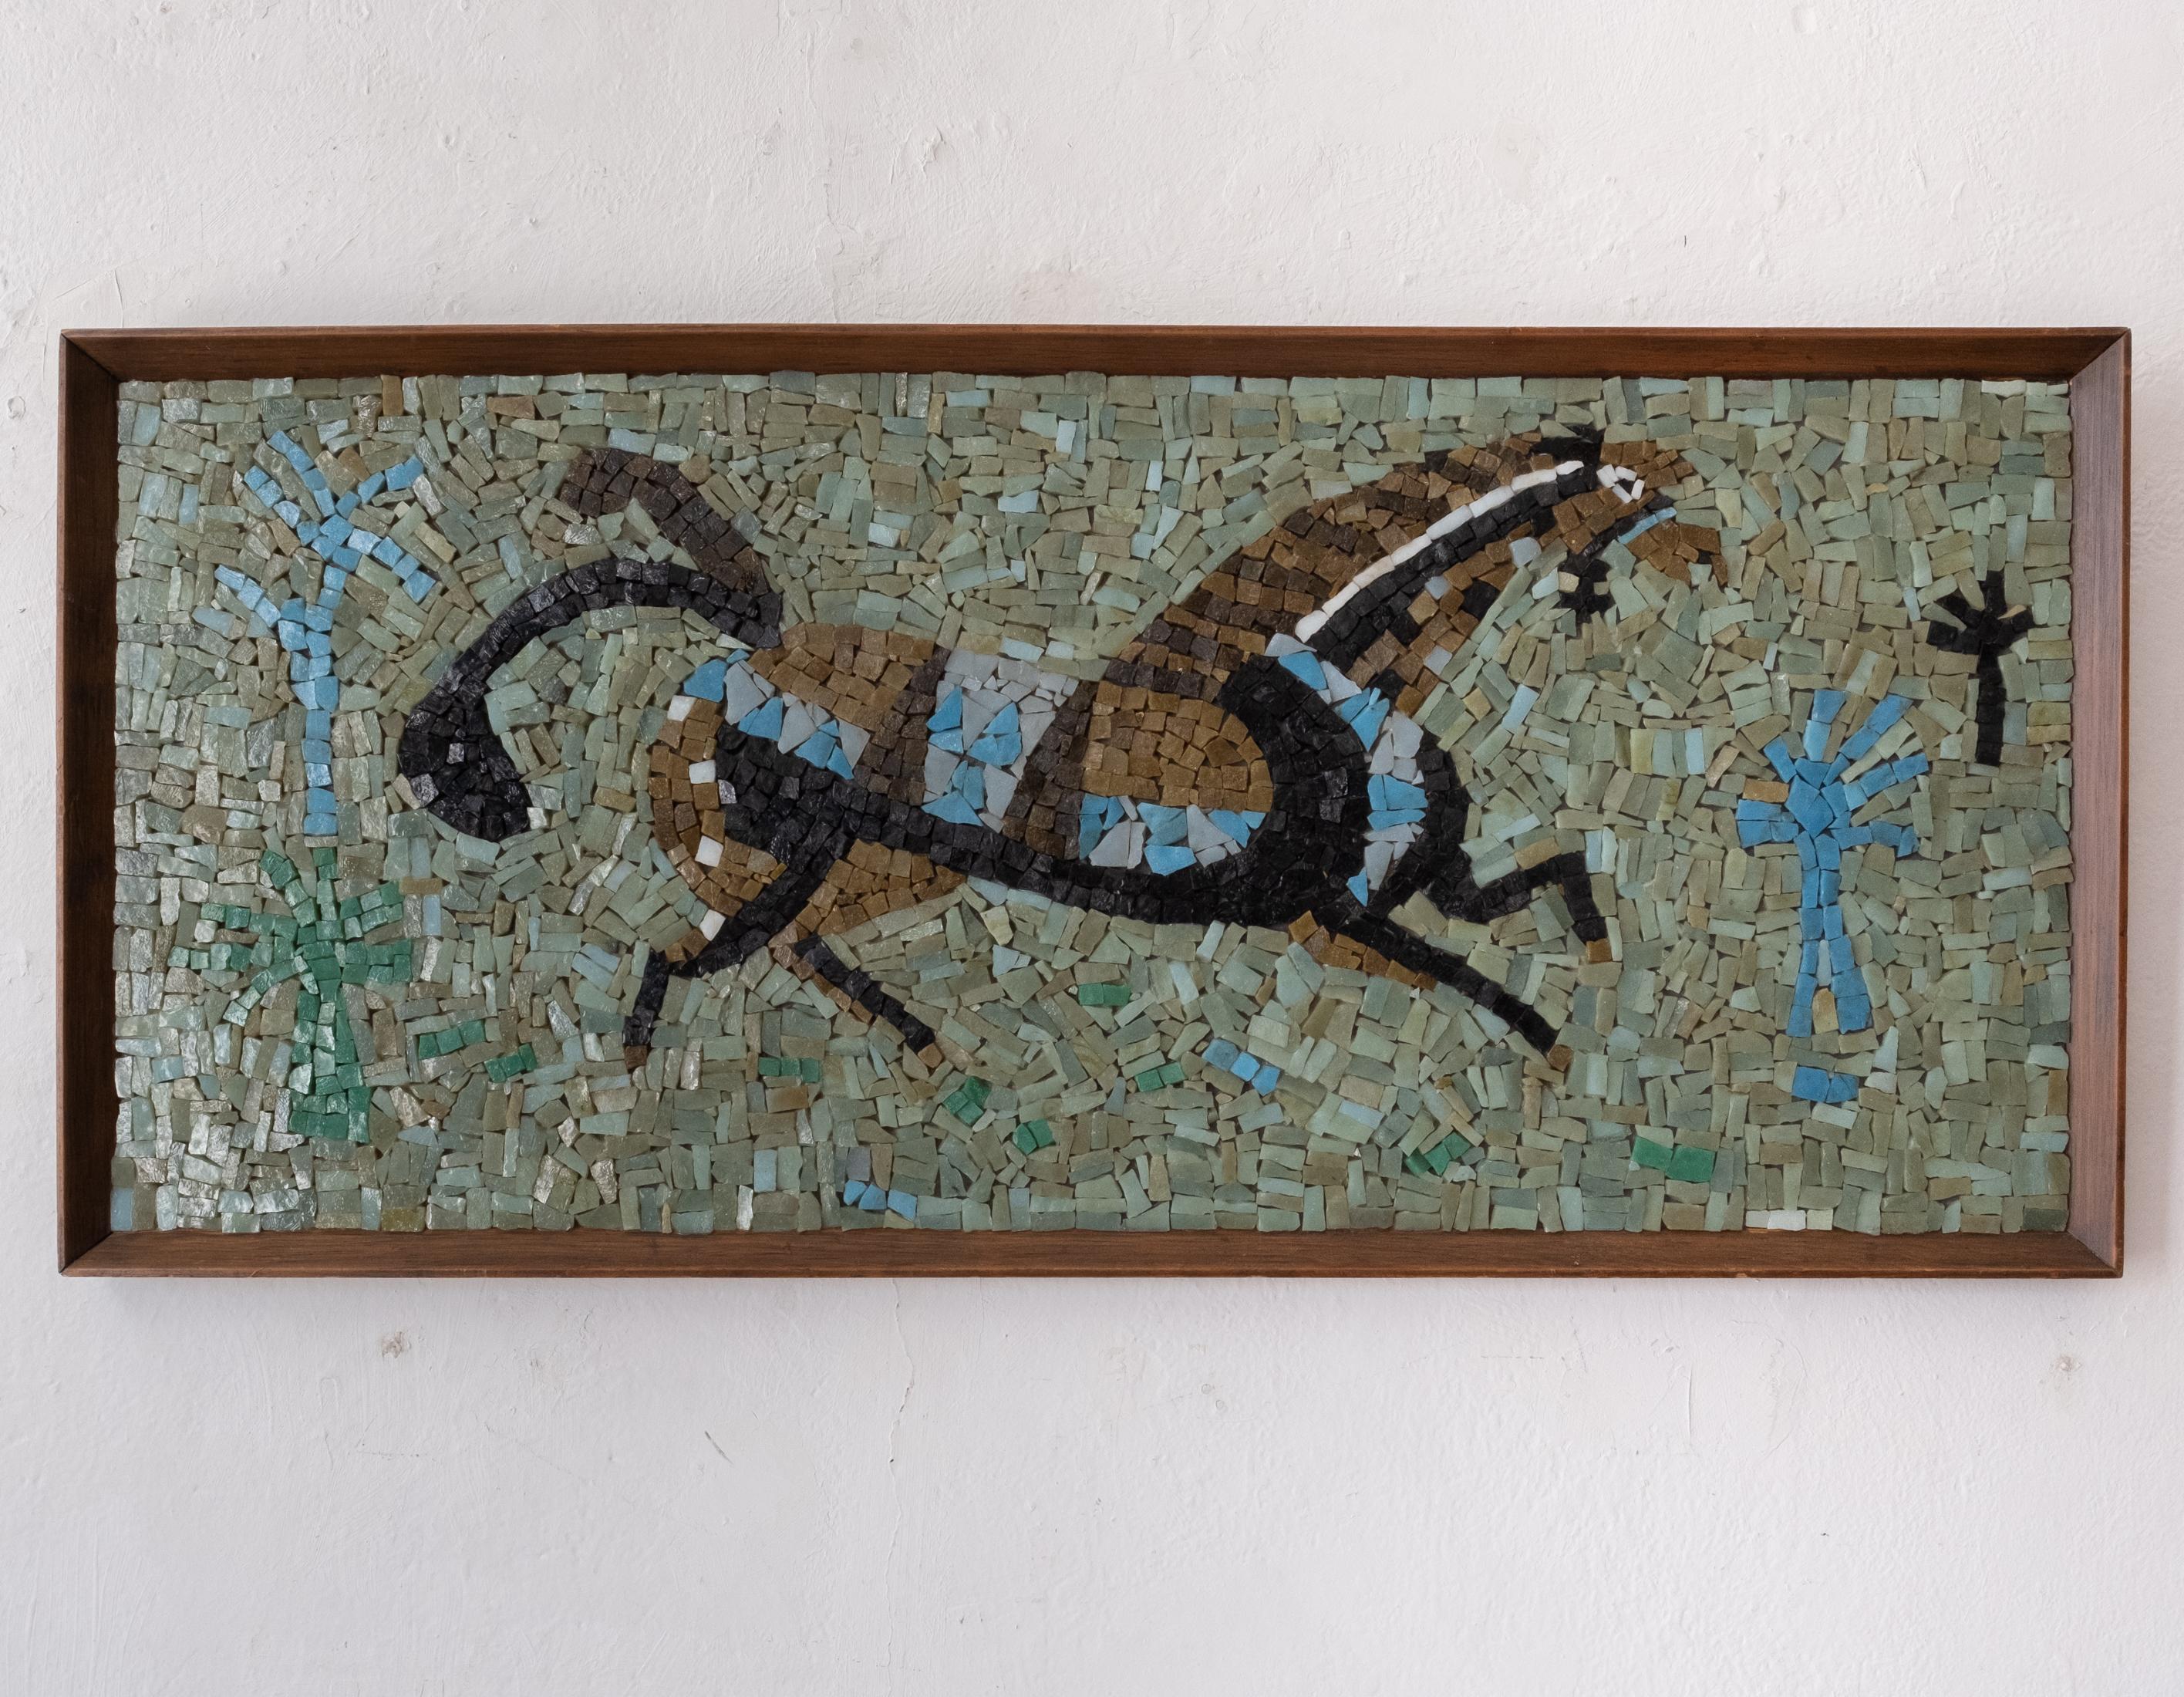 Gallant Horse glass tile mosaic by Evelyn and Jerome Ackerman for their company, ERA. Wood frame. ERA Industries, 1957. Retains original label. 

Literature: Hand-in-Hand: Ceramics, Mosaics, Tapestries and Woodcarvings by the California